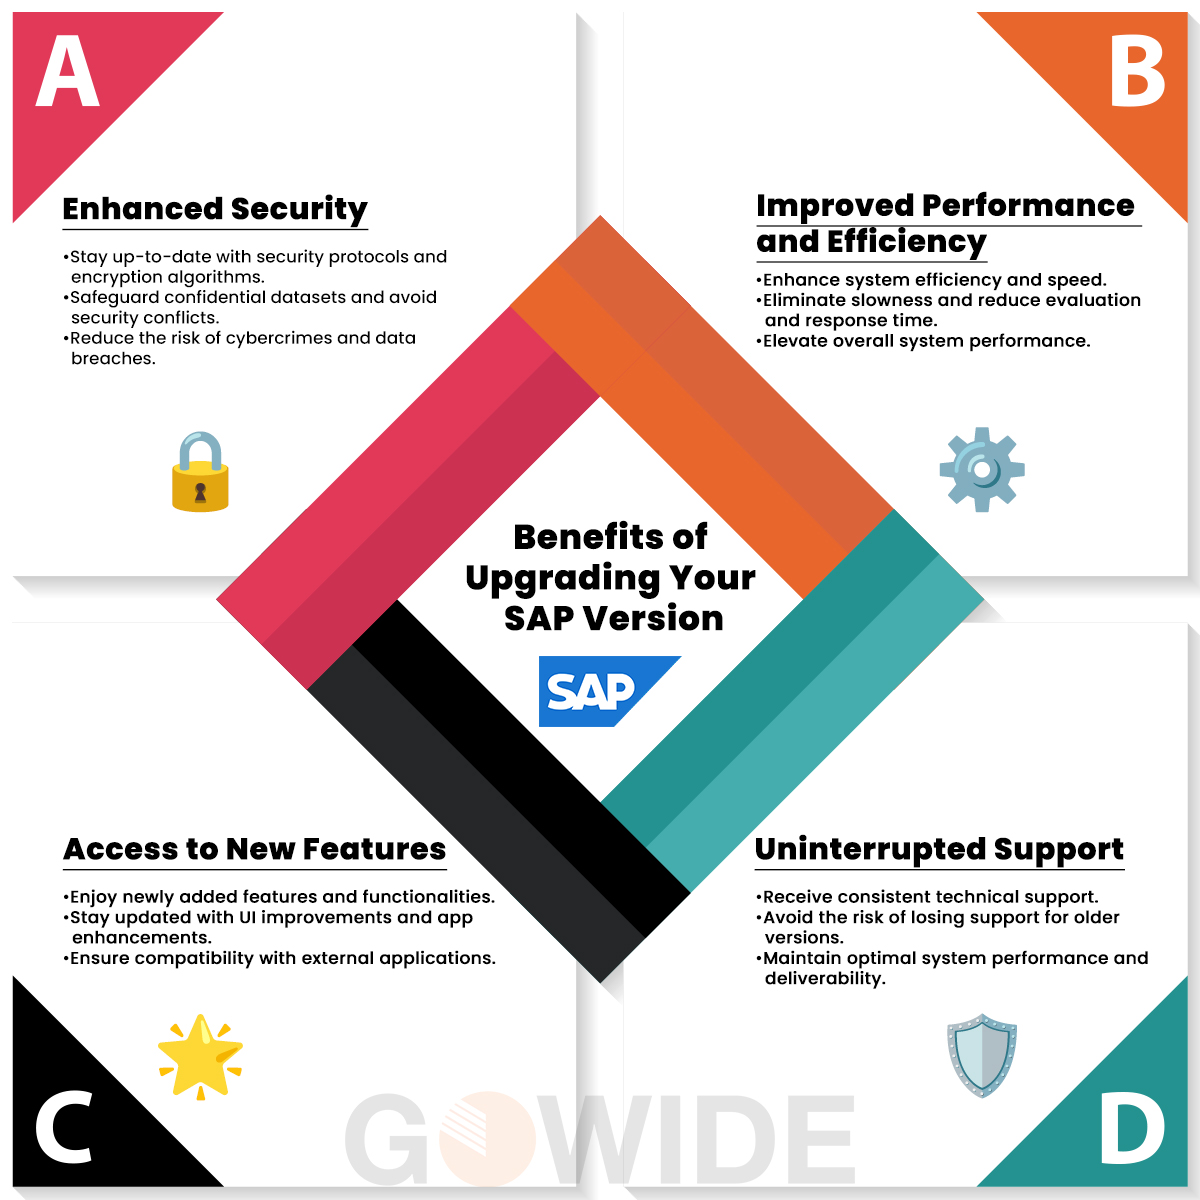 Benefits of upgrading your SAP version infographic